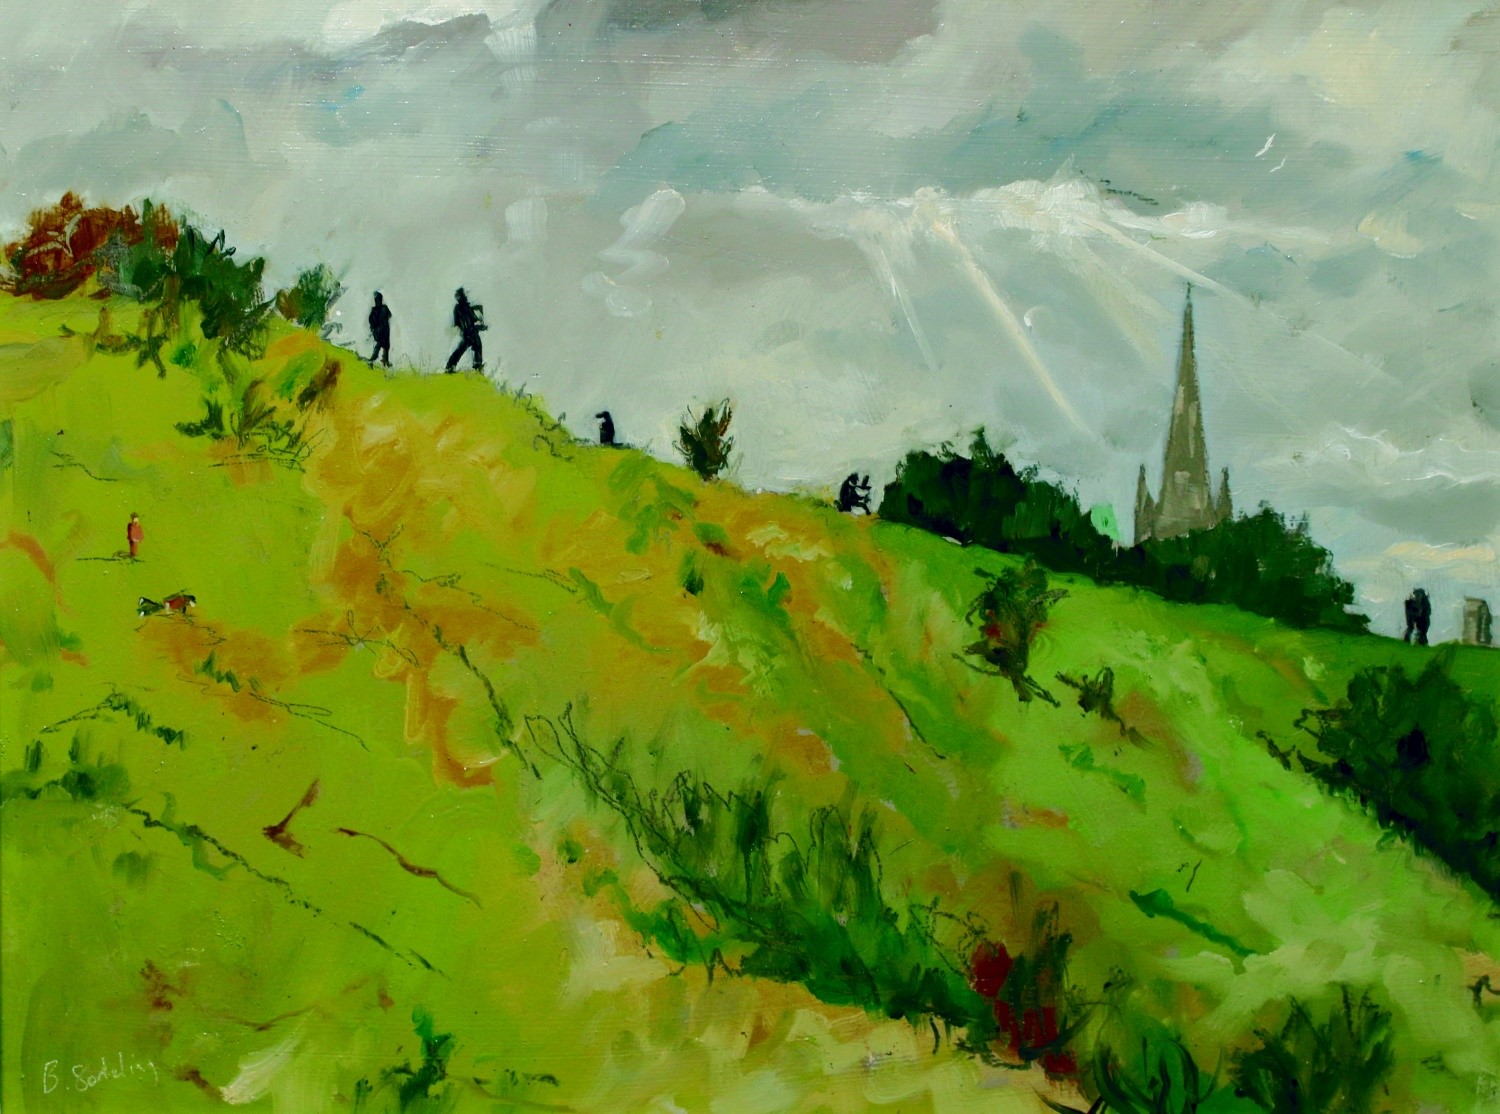 Artist Brian Korteling - We Painted For a While, Then We Rolled Down the Hill, £350 14x11 Oil on Board at Paint Out Norwich 2015